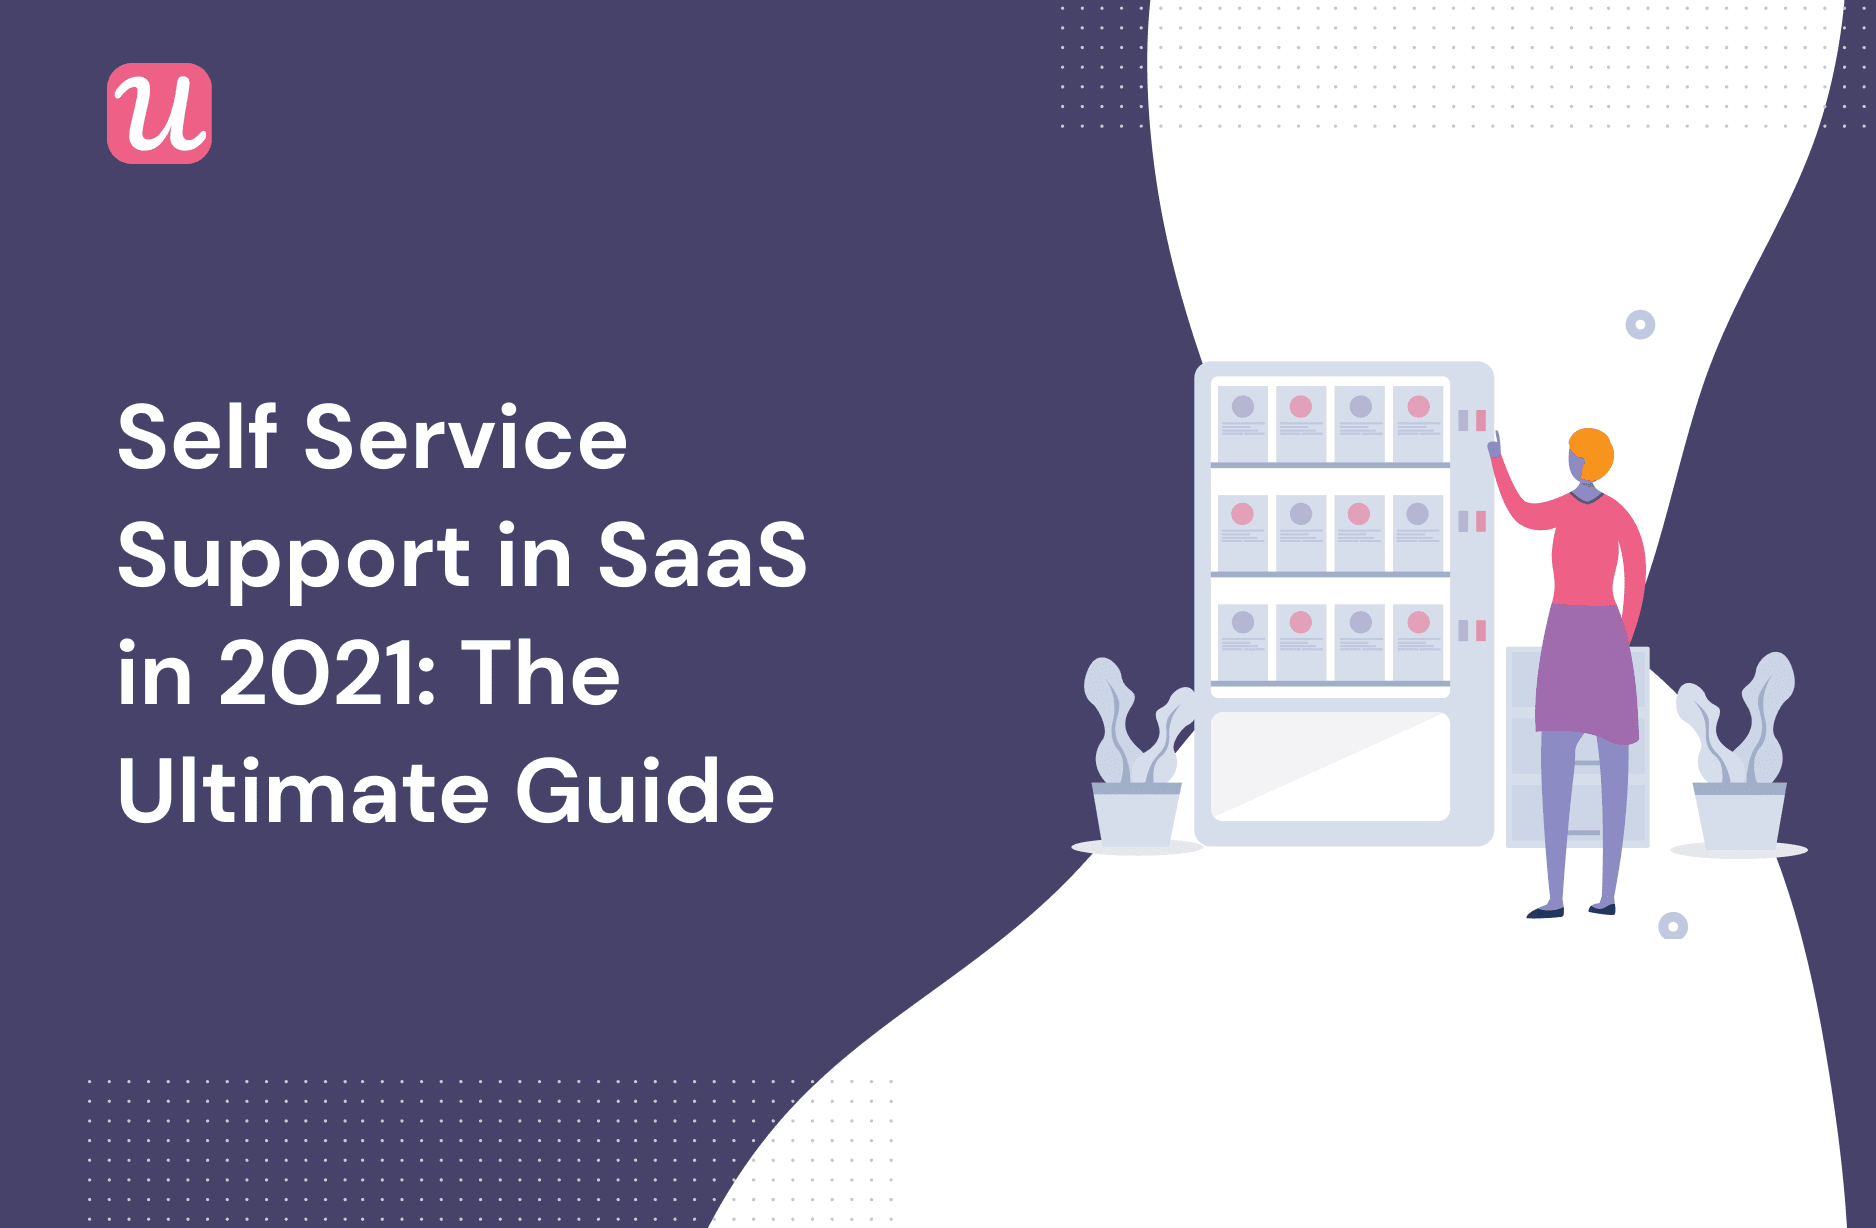 Self Service Support In SaaS in 2021: The Ultimate Guide